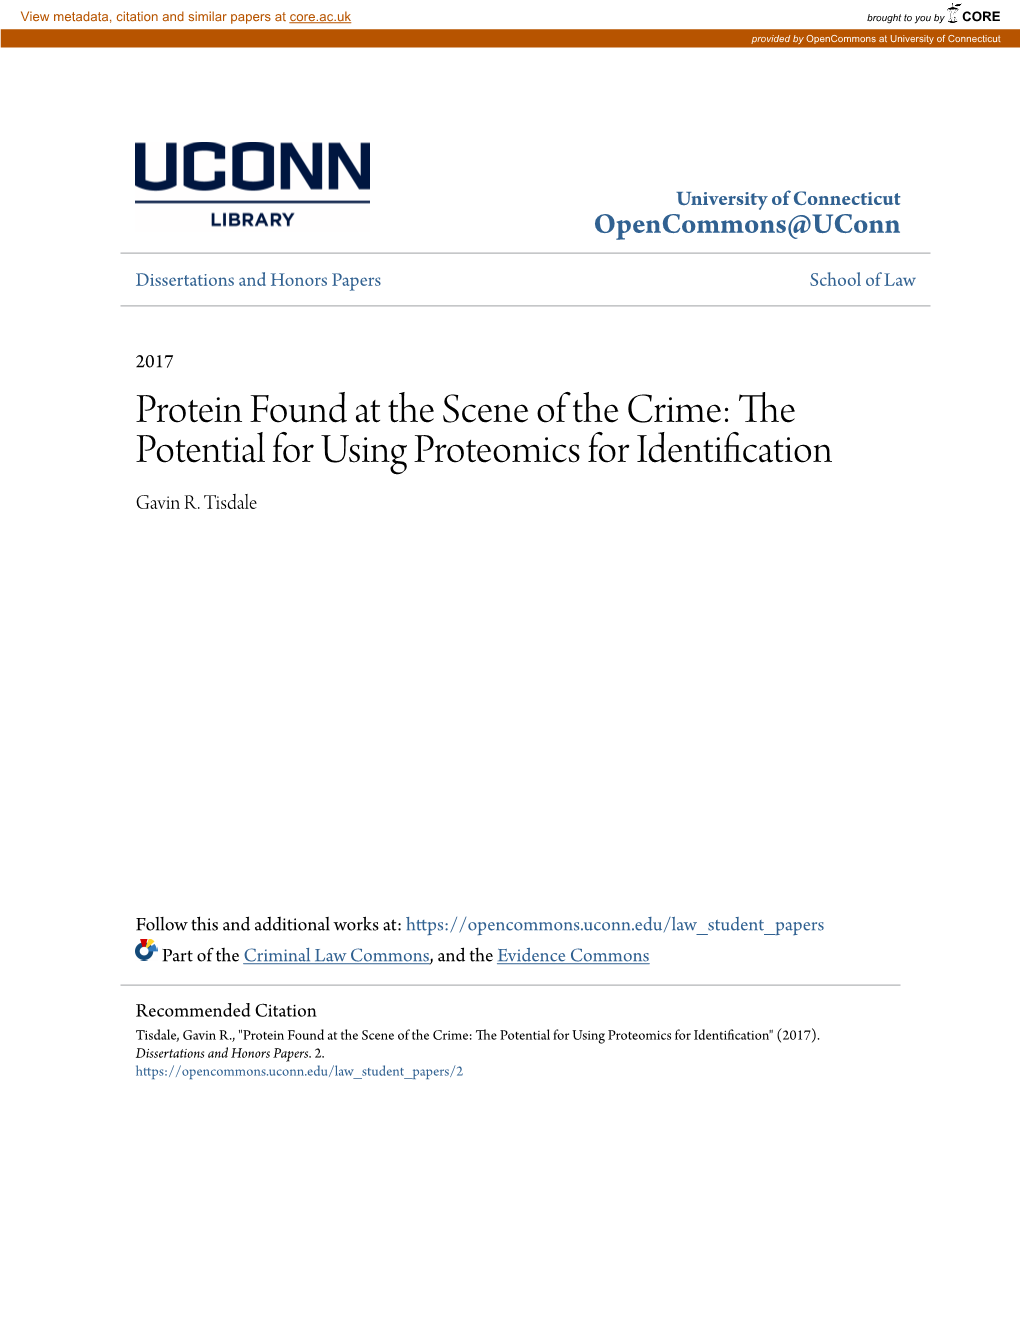 Protein Found at the Scene of the Crime: the Potential for Using Proteomics for Identification Gavin R